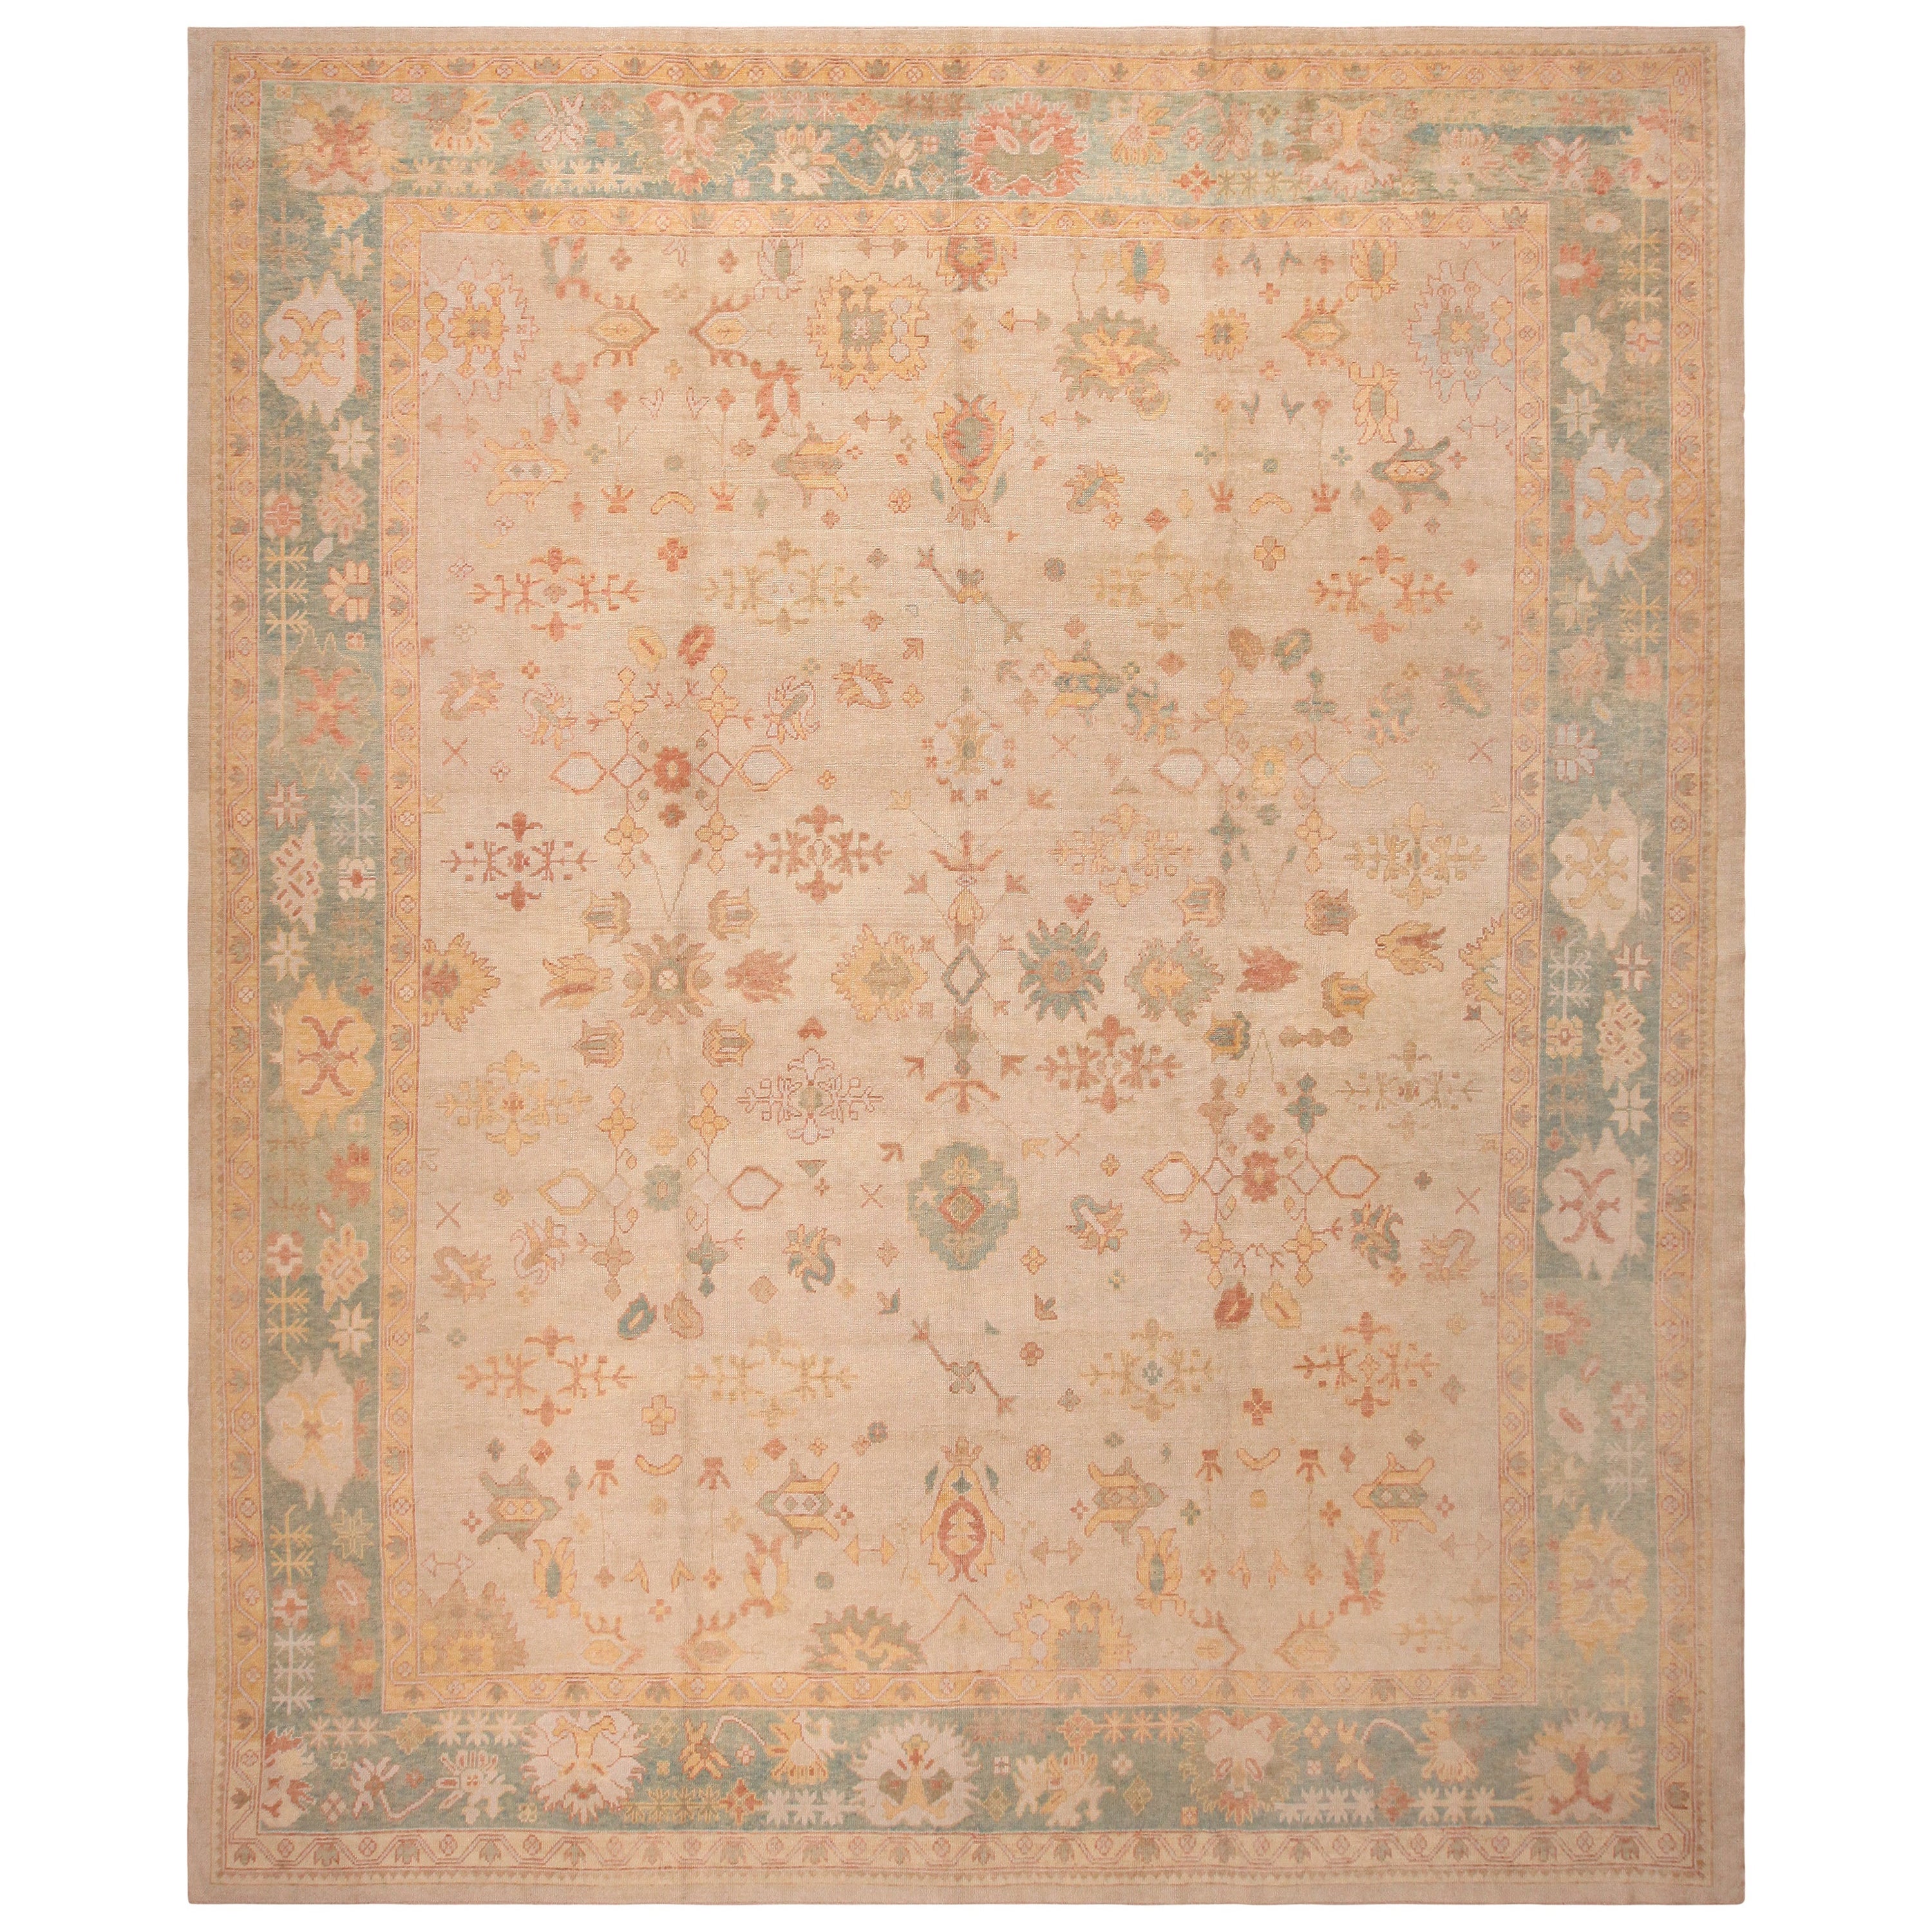 Nazmiyal Collection Large Modern Turkish Oushak Rug. 13 ft 10 in x 16 ft 6 in